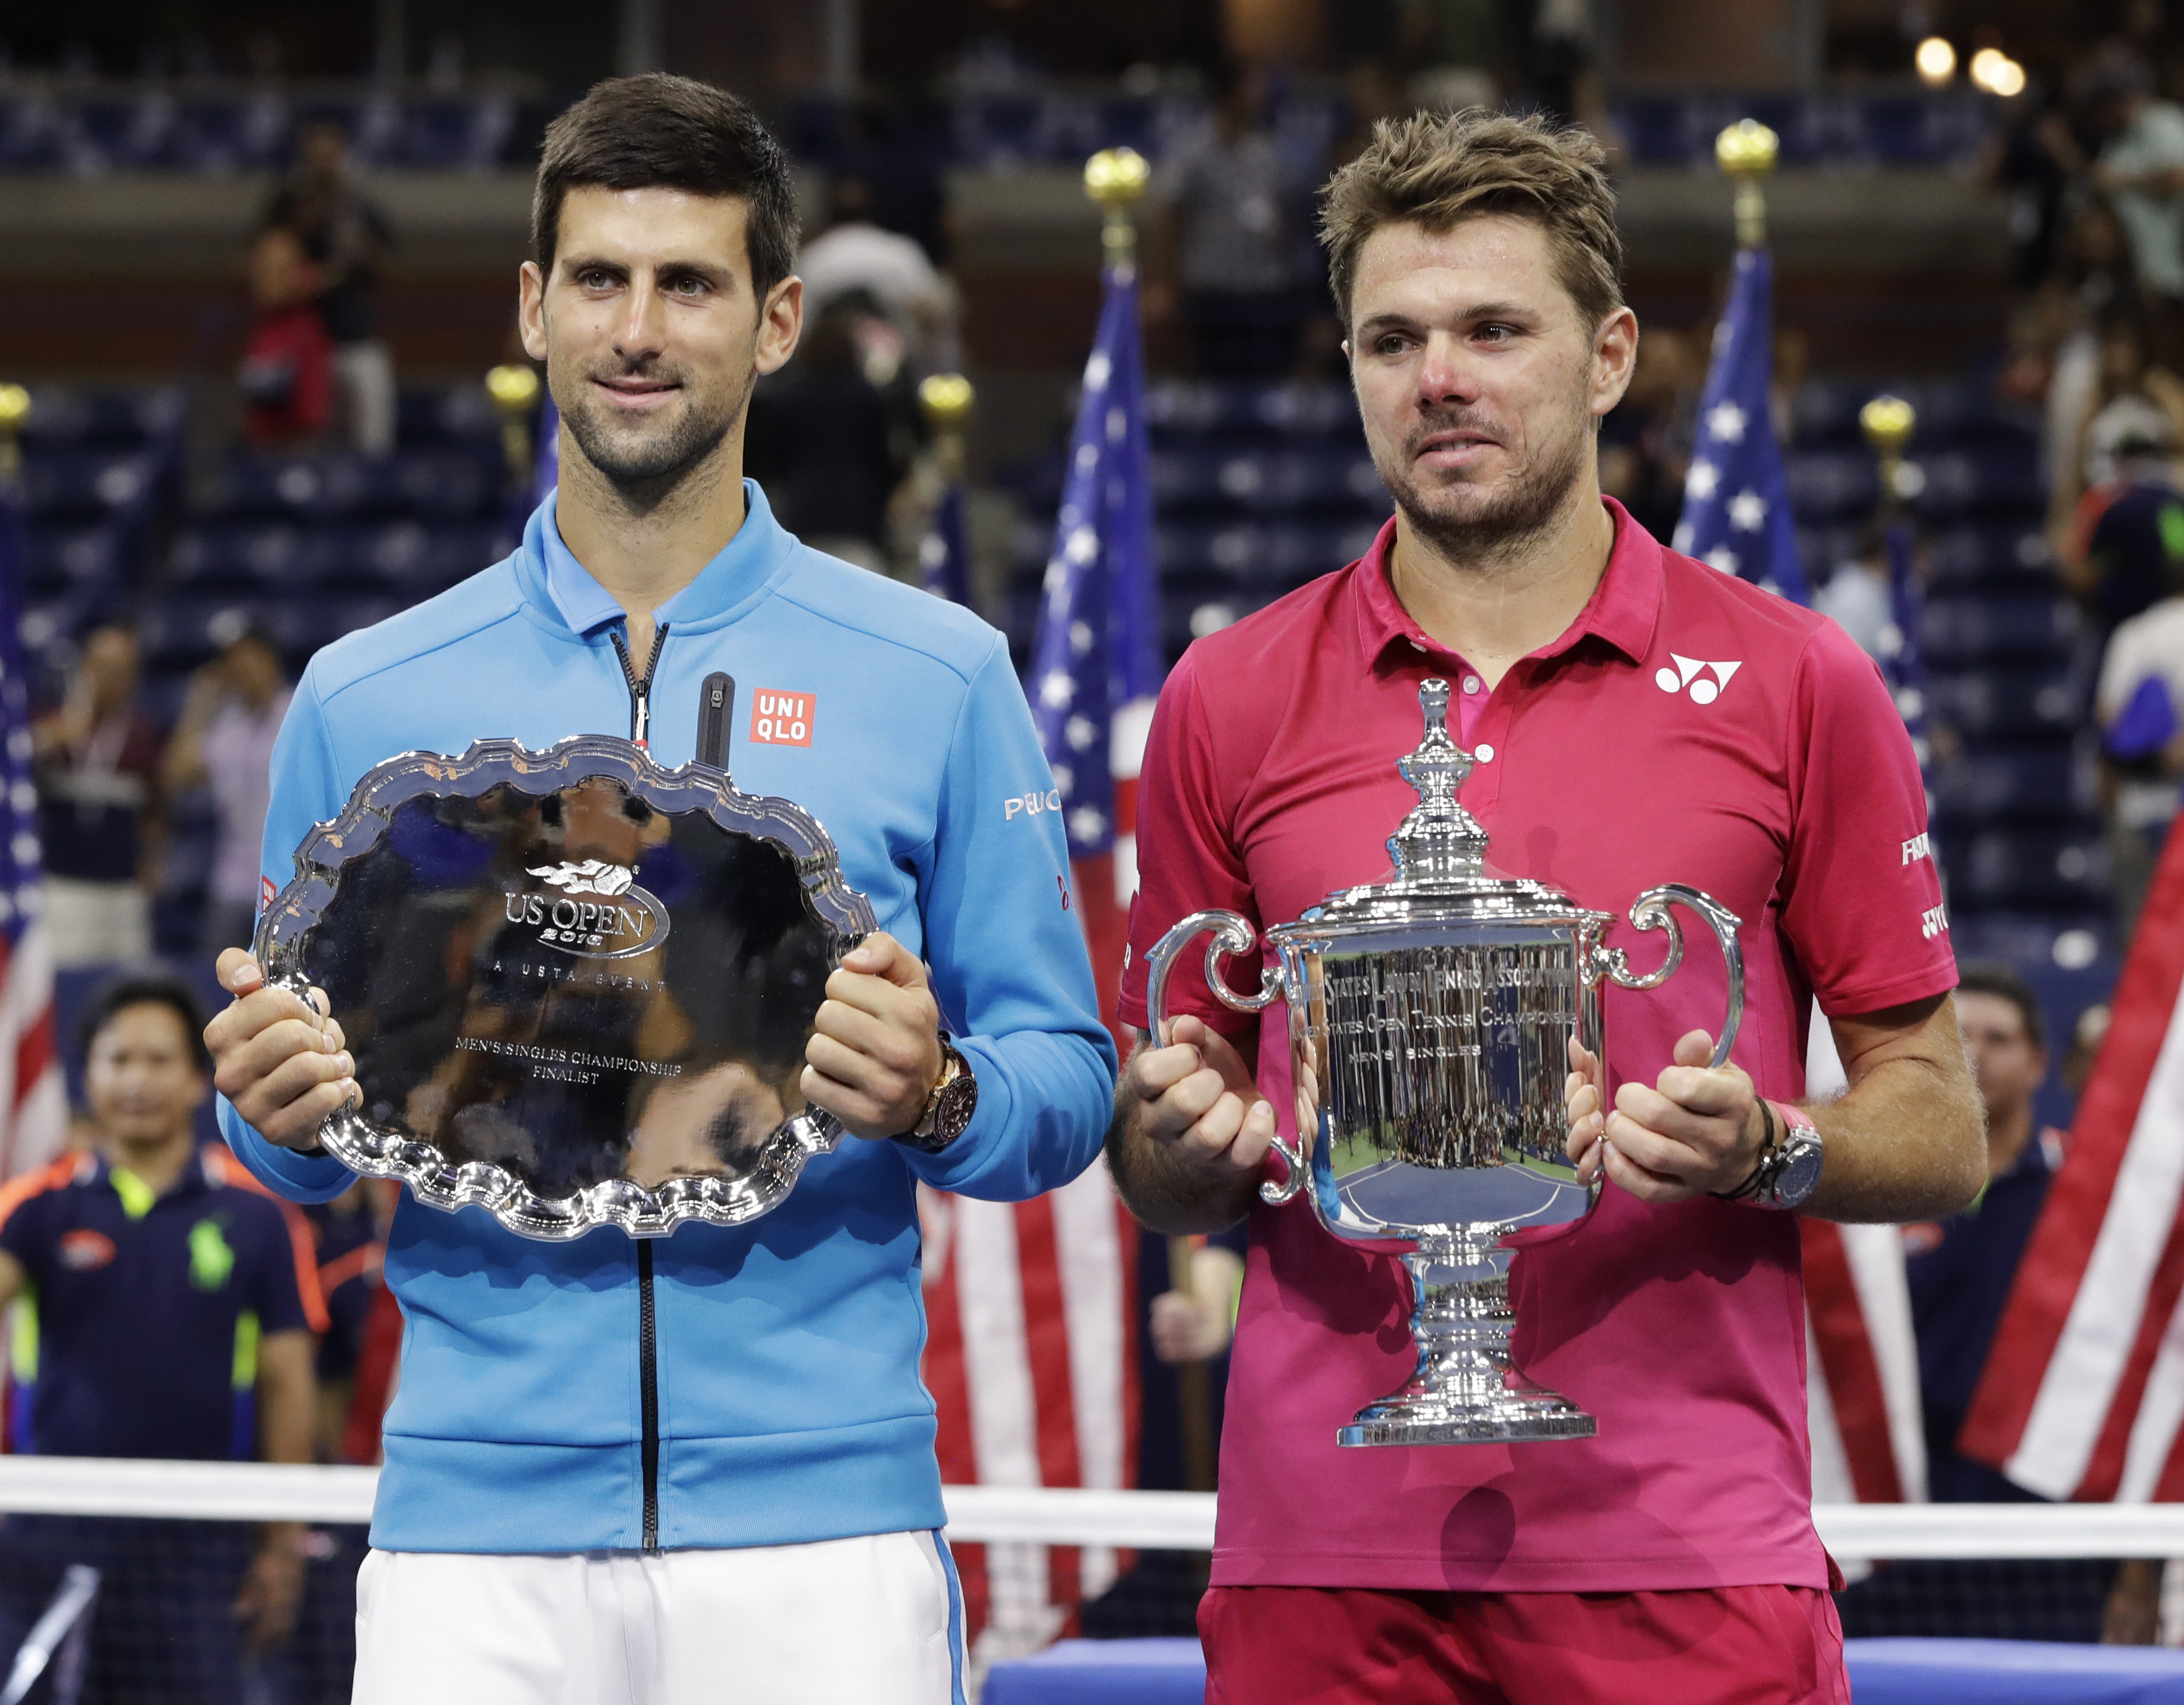 U.S. Open ratings see decline, especially for men's final